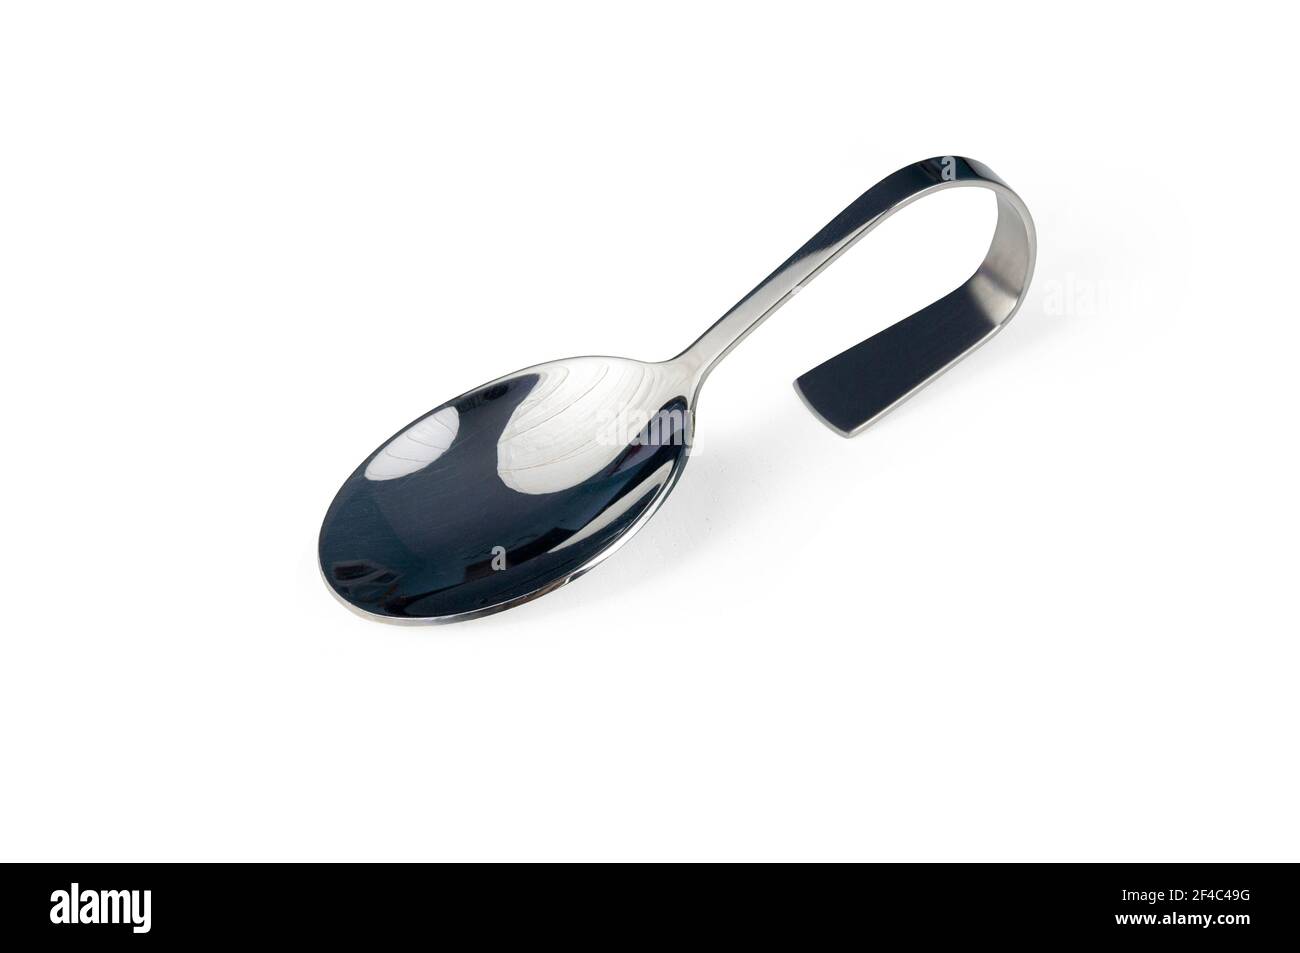 https://c8.alamy.com/comp/2F4C49G/silver-spoon-with-curved-handle-photographed-half-sideways-isolated-on-white-bended-baby-spoon-with-a-loop-handle-2F4C49G.jpg